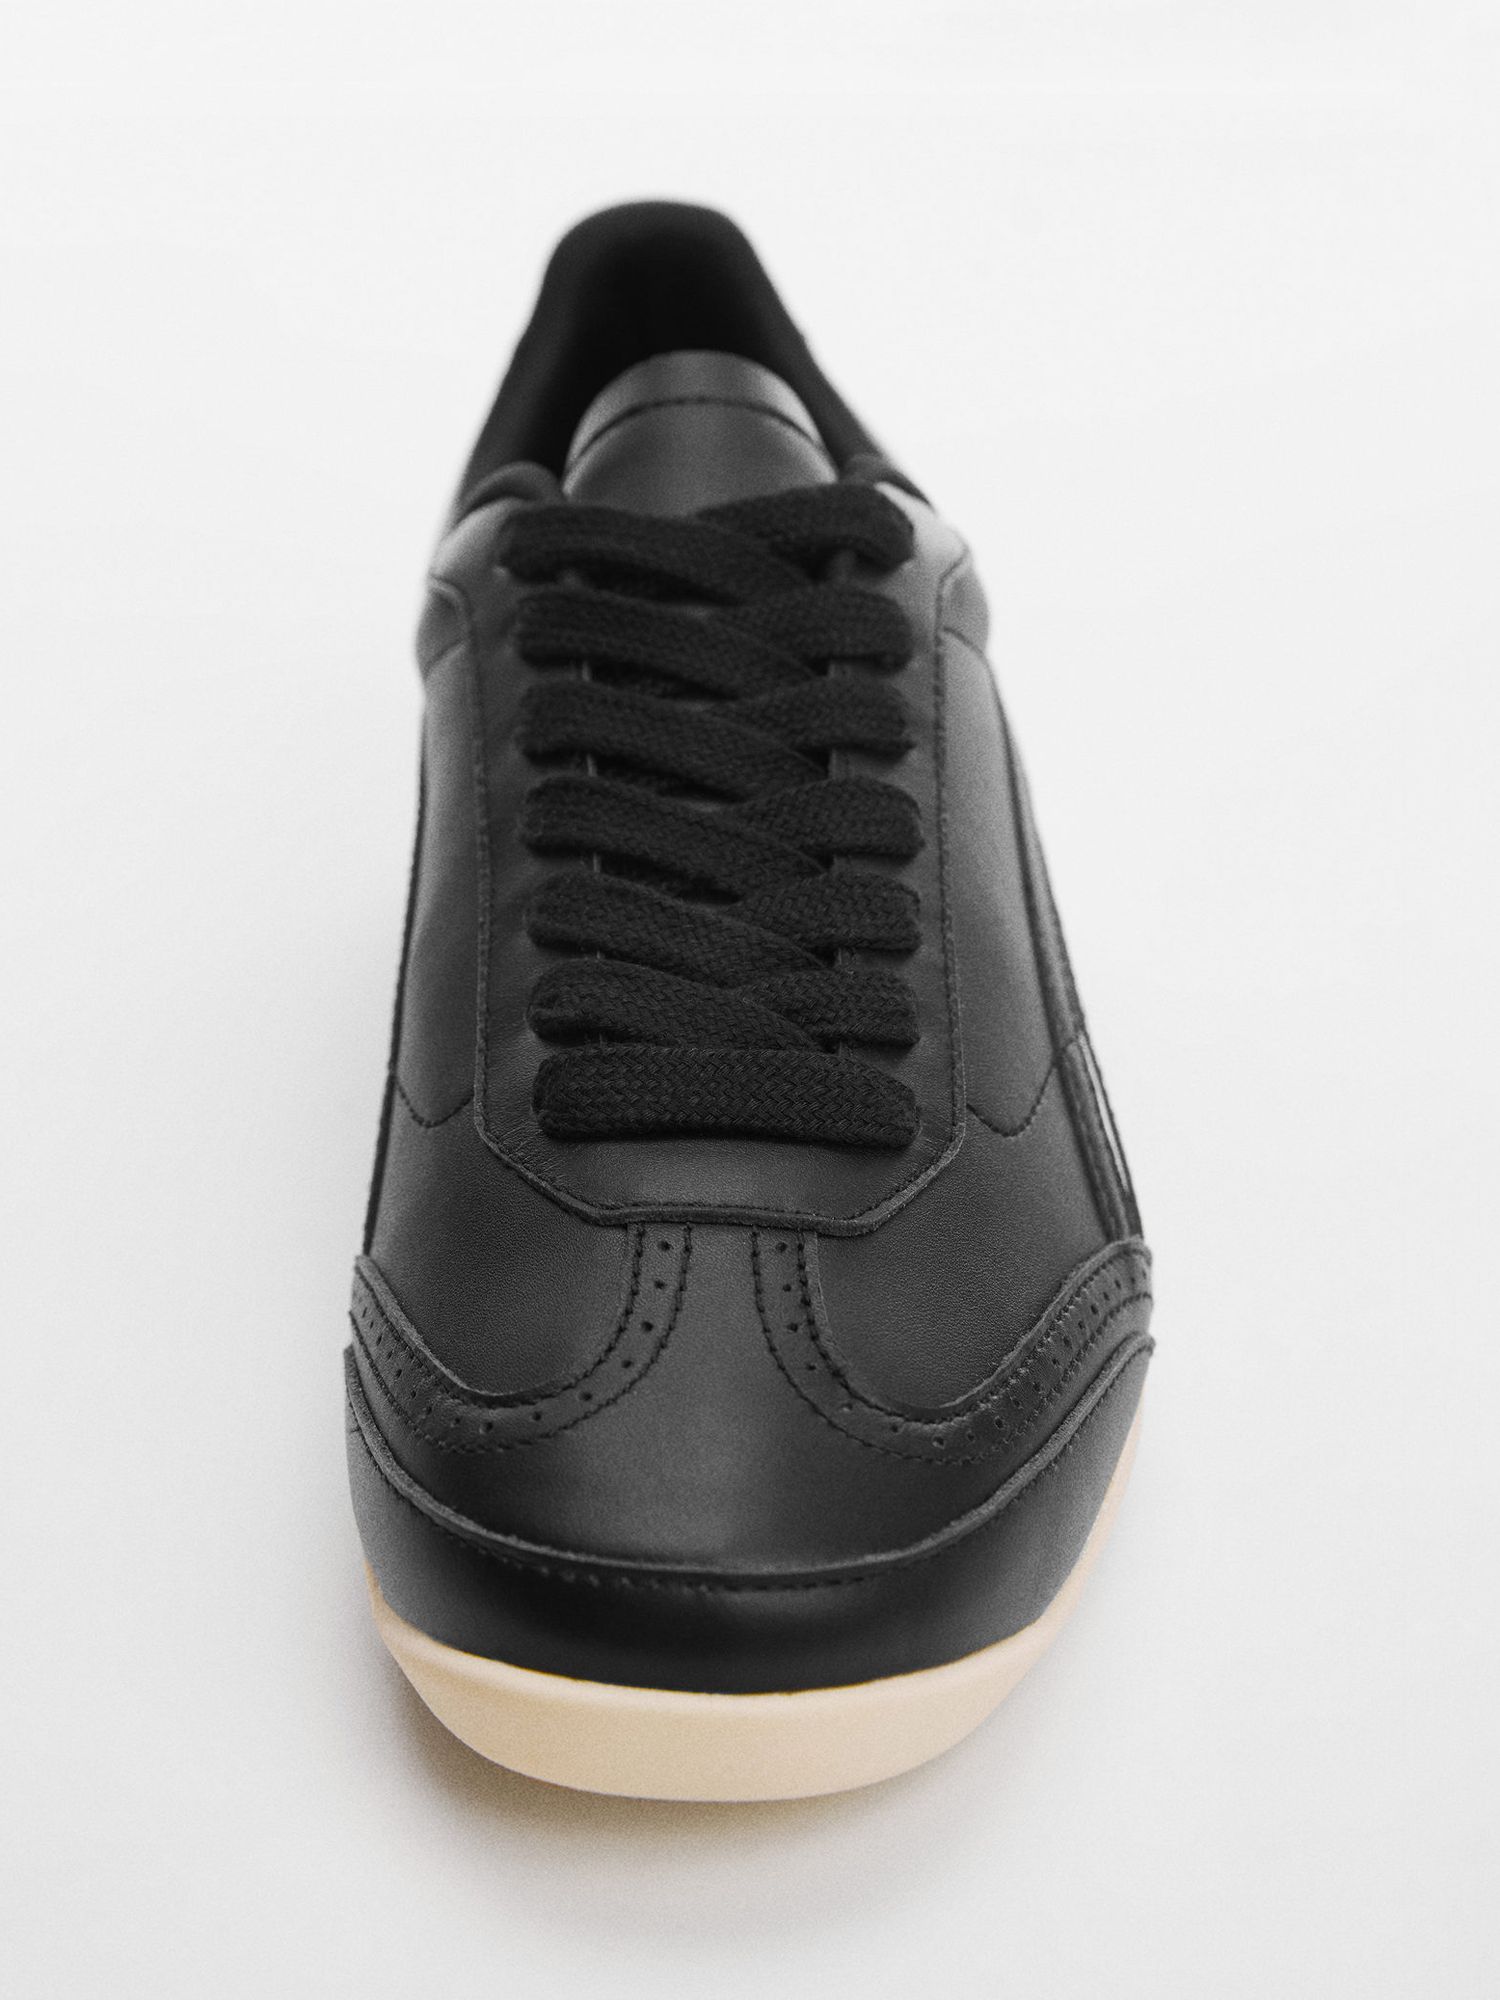 Buy Mango Meyer Lace-Up Leather Trainers, Black Online at johnlewis.com